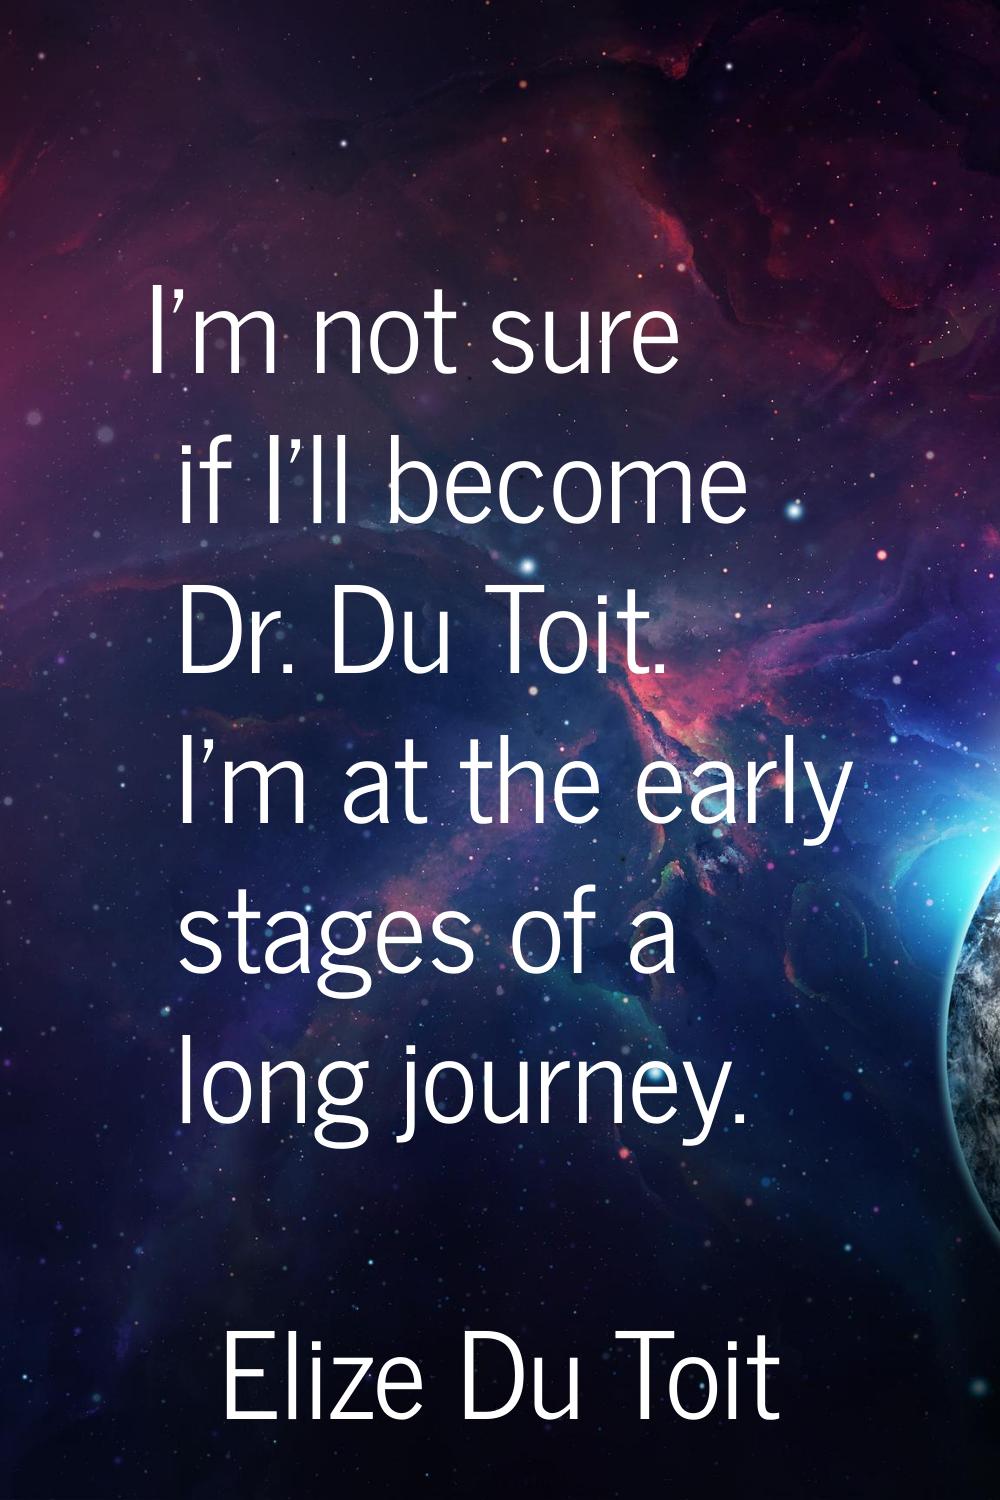 I'm not sure if I'll become Dr. Du Toit. I'm at the early stages of a long journey.